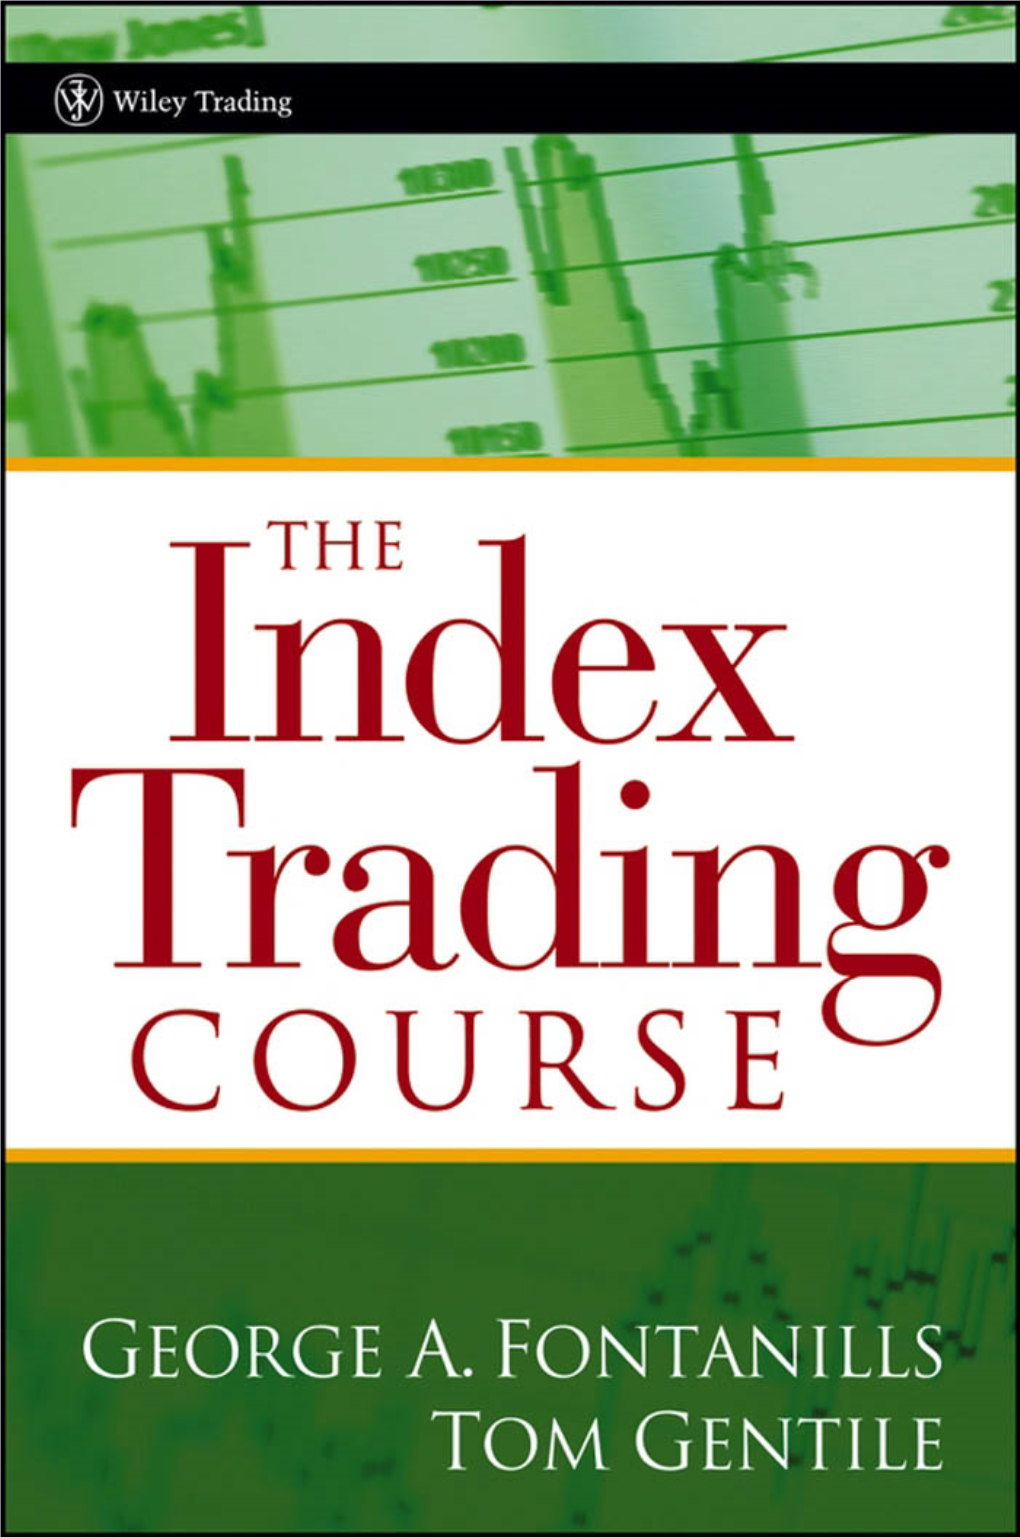 Fontanills G.A., Gentile T. the Index Trading Course (Wiley, 2006)(ISBN